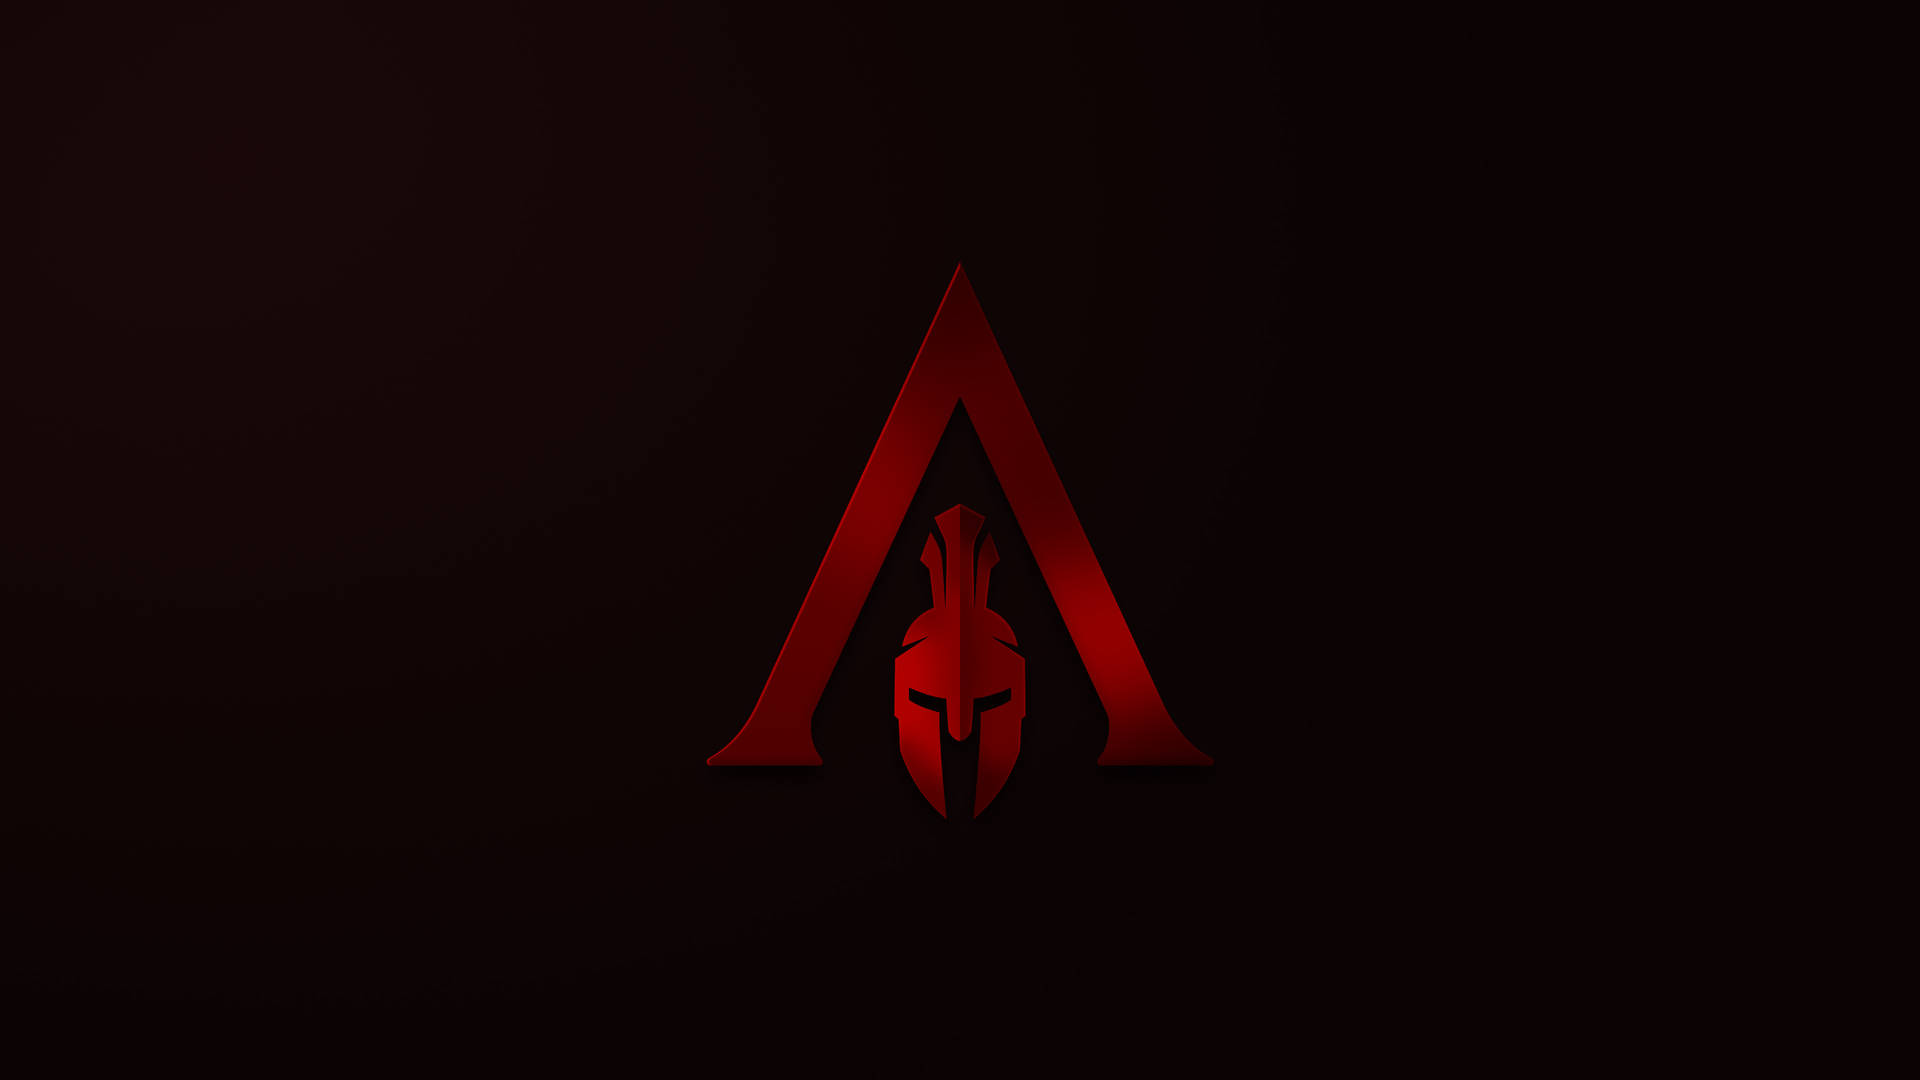 Assassin's Creed Odyssey Aesthetic Game Logo Background